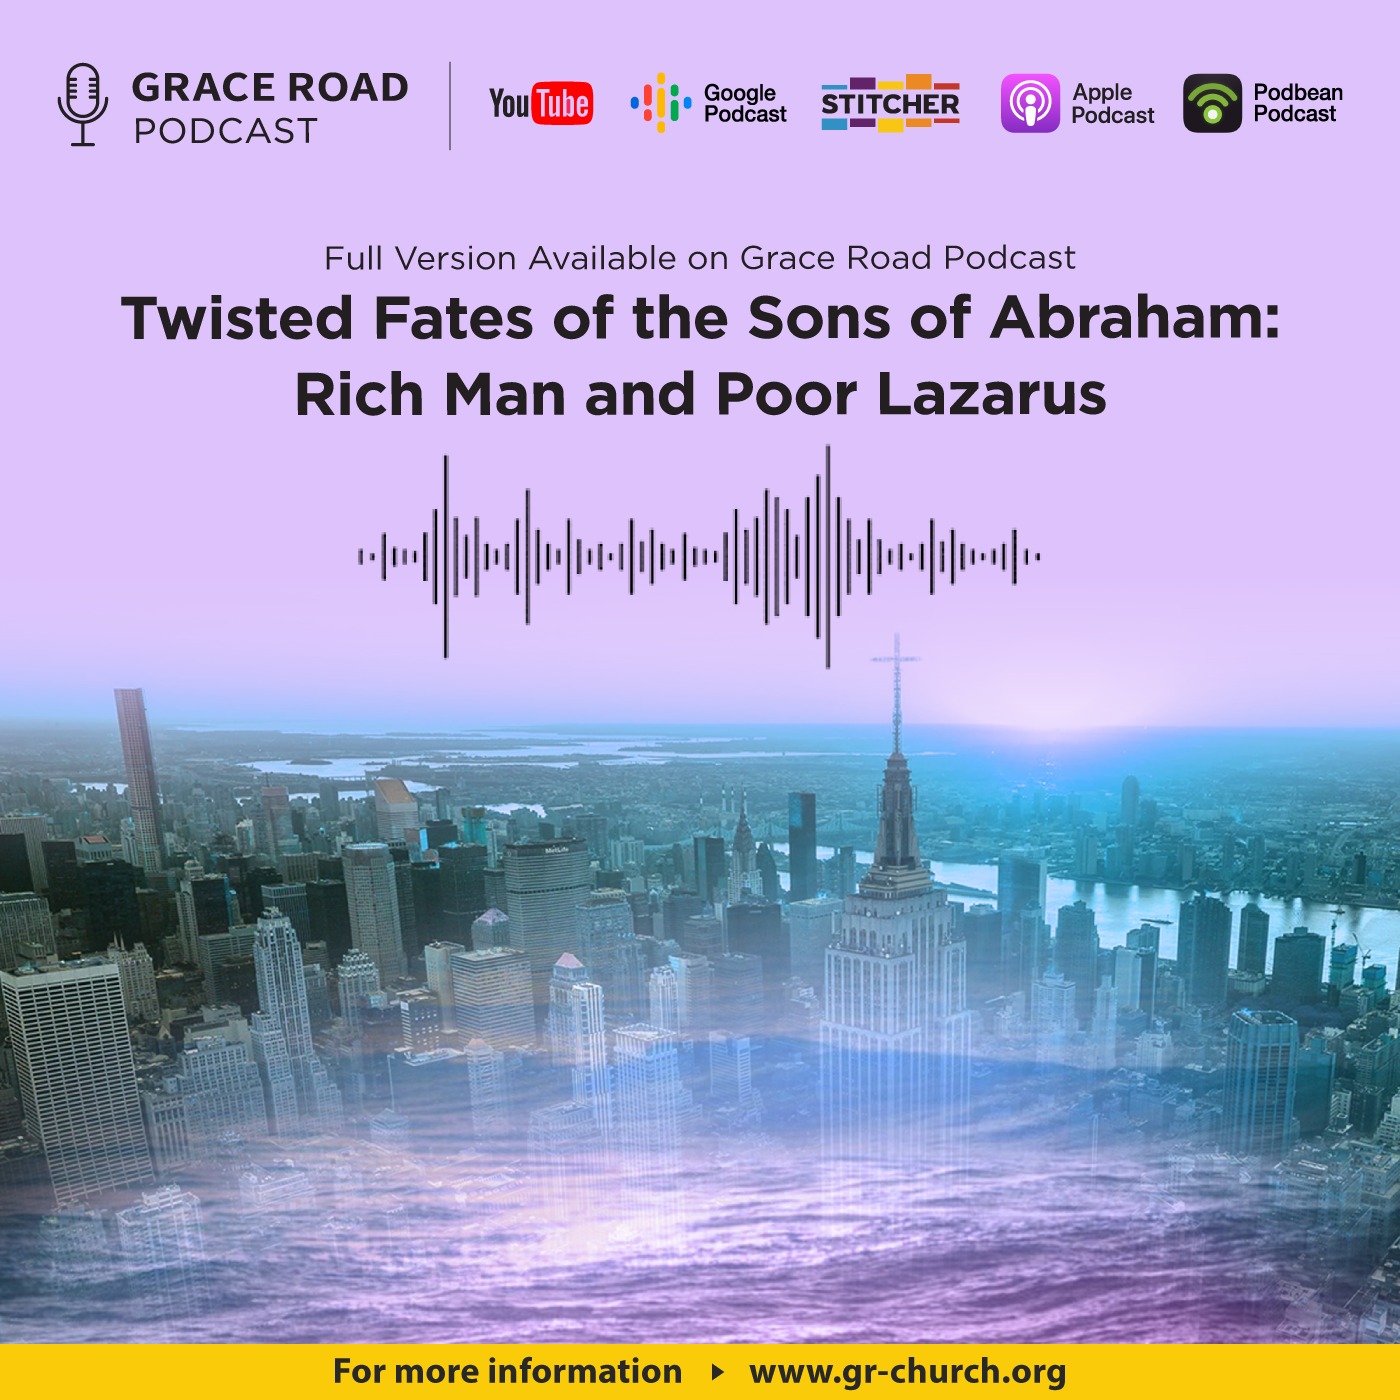 Twisted Fates of the Sons of Abraham: Rich Man and Poor Lazarus